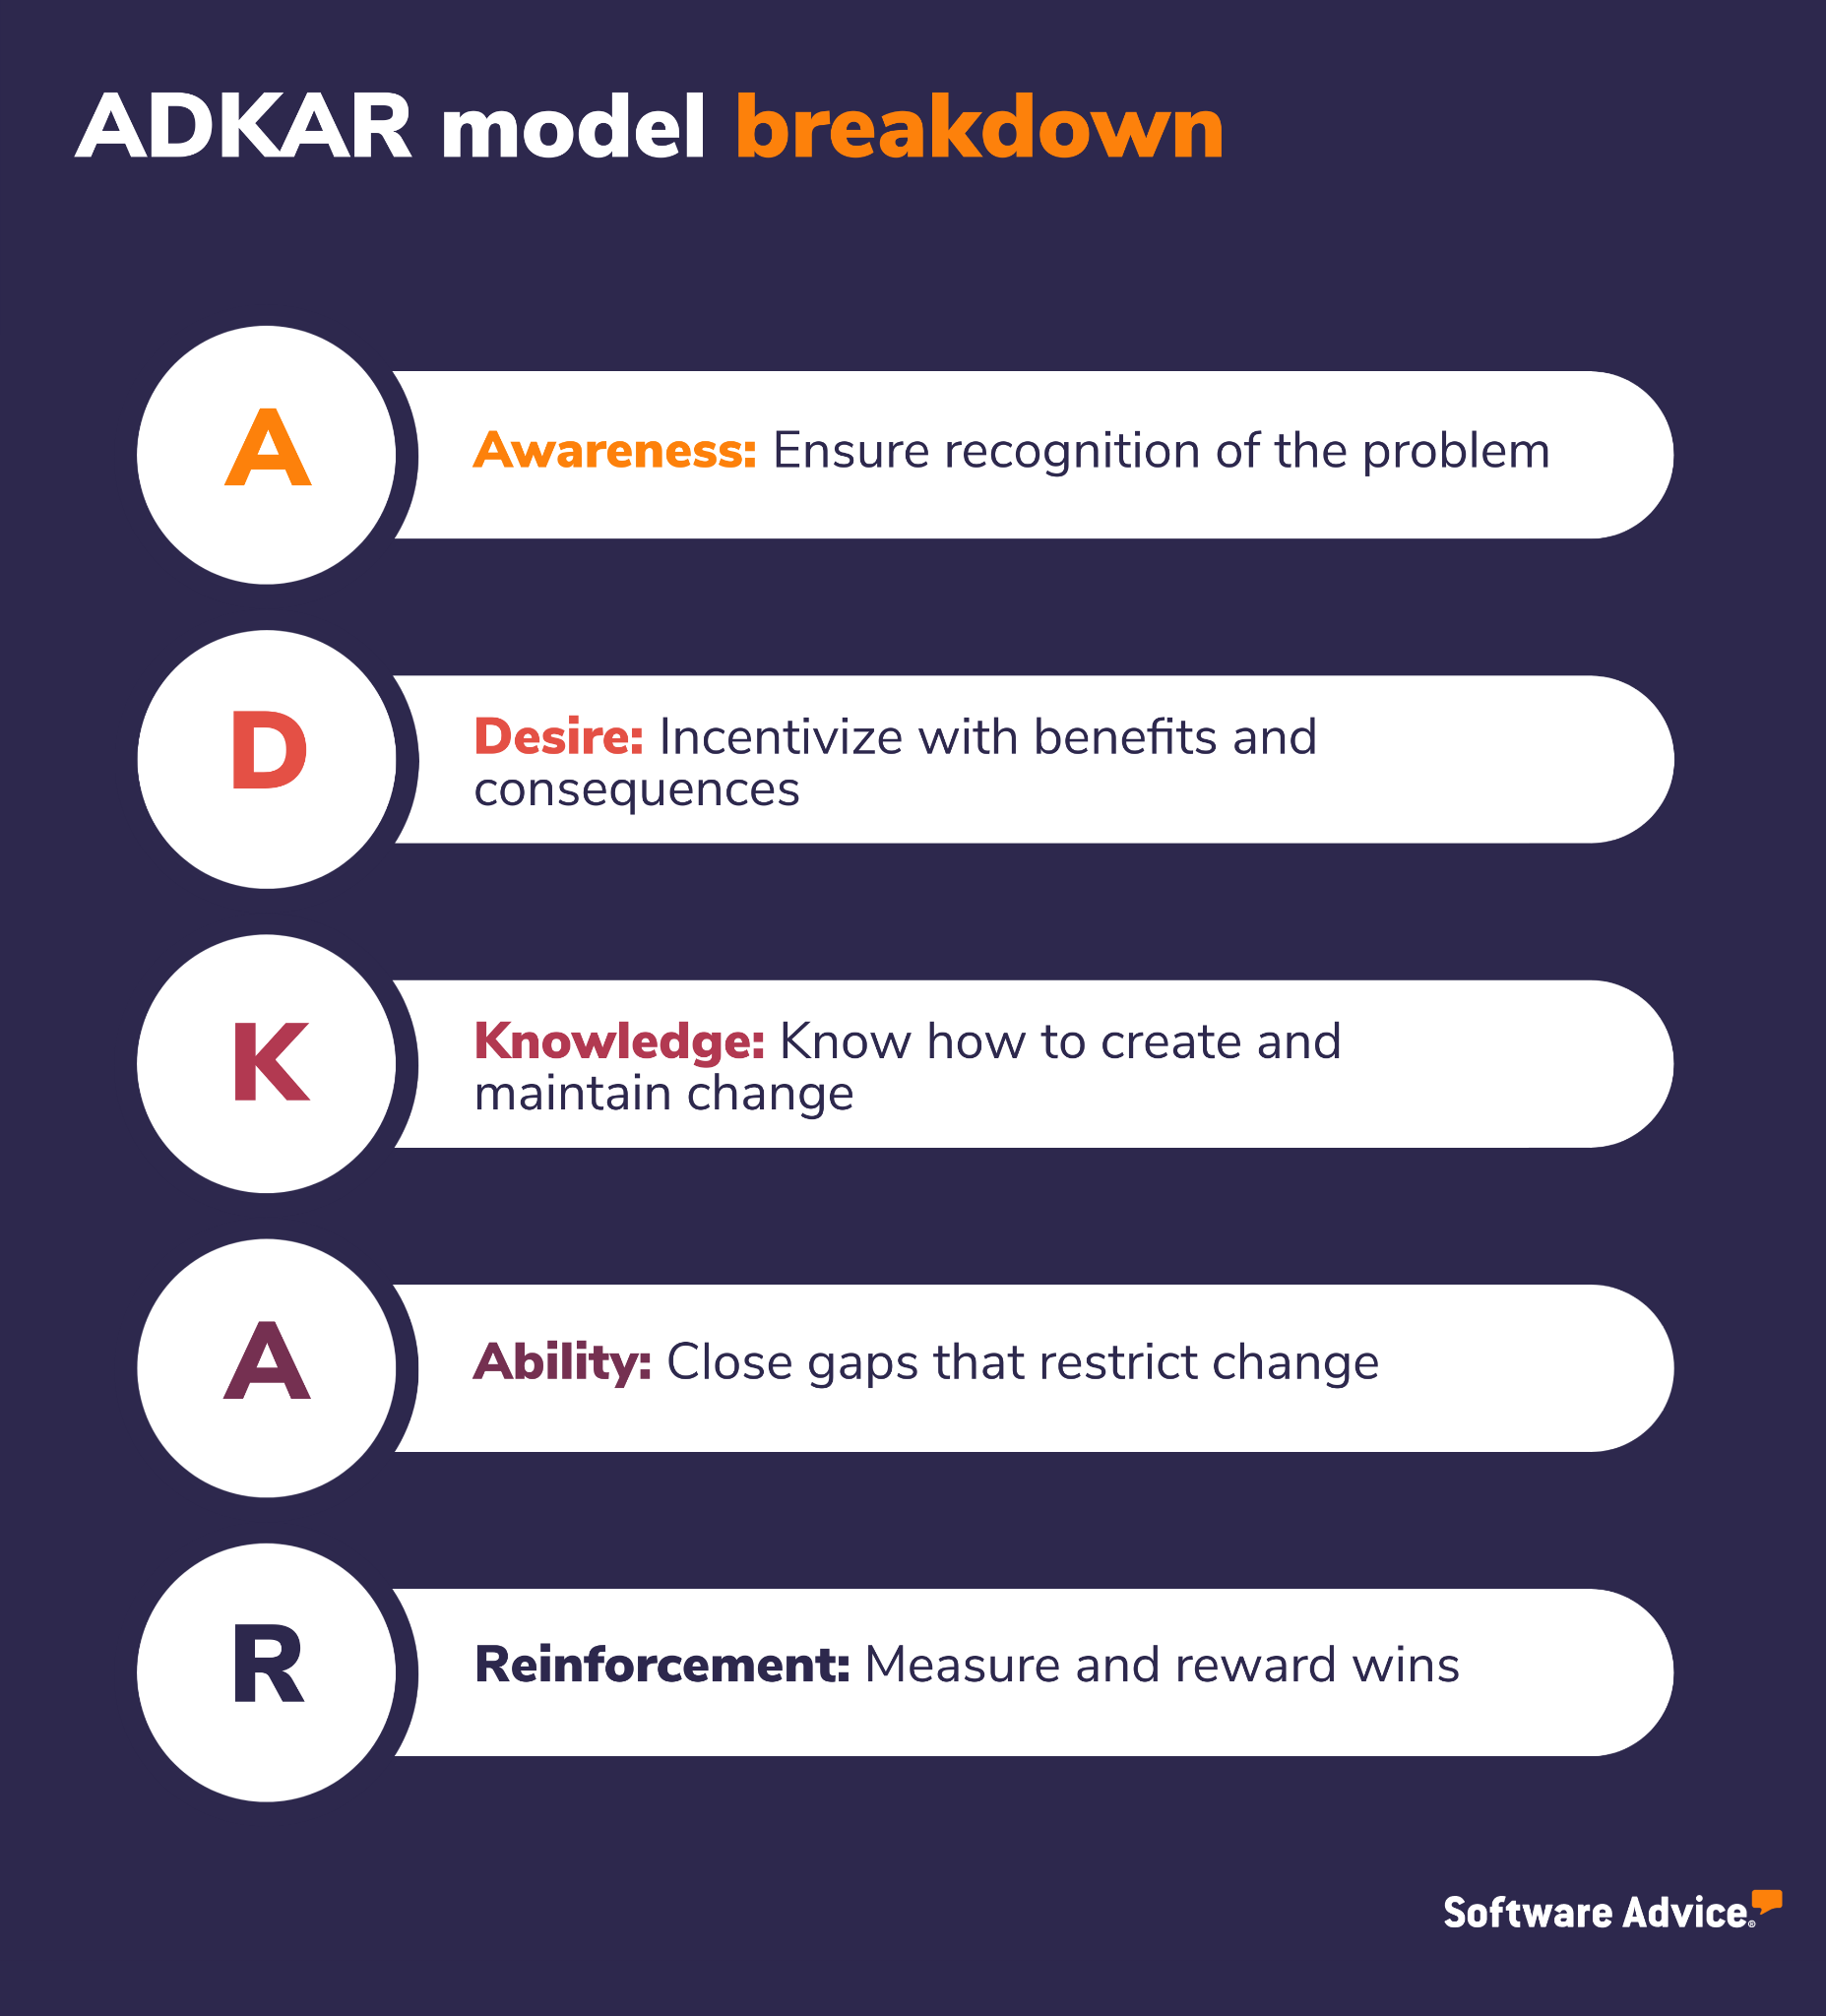 A graphical breakdown of the ADKAR model